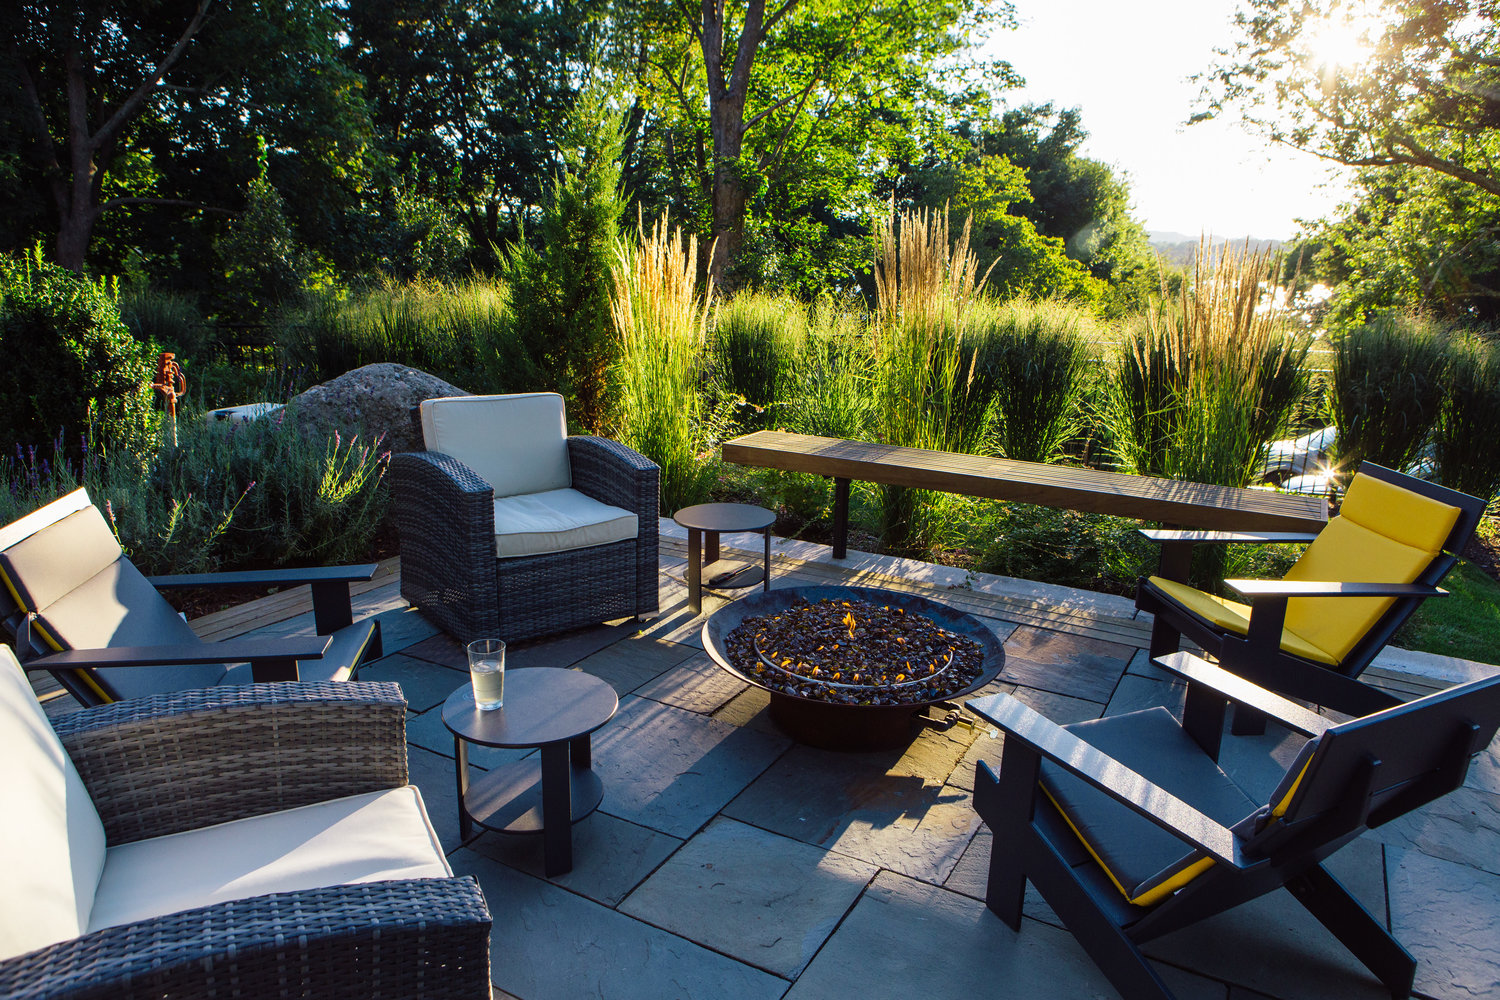 The fire pit area adjoining the pool enjoys its own private space, with natural grasses providing the relaxing atmosphere one would expect in this setting.